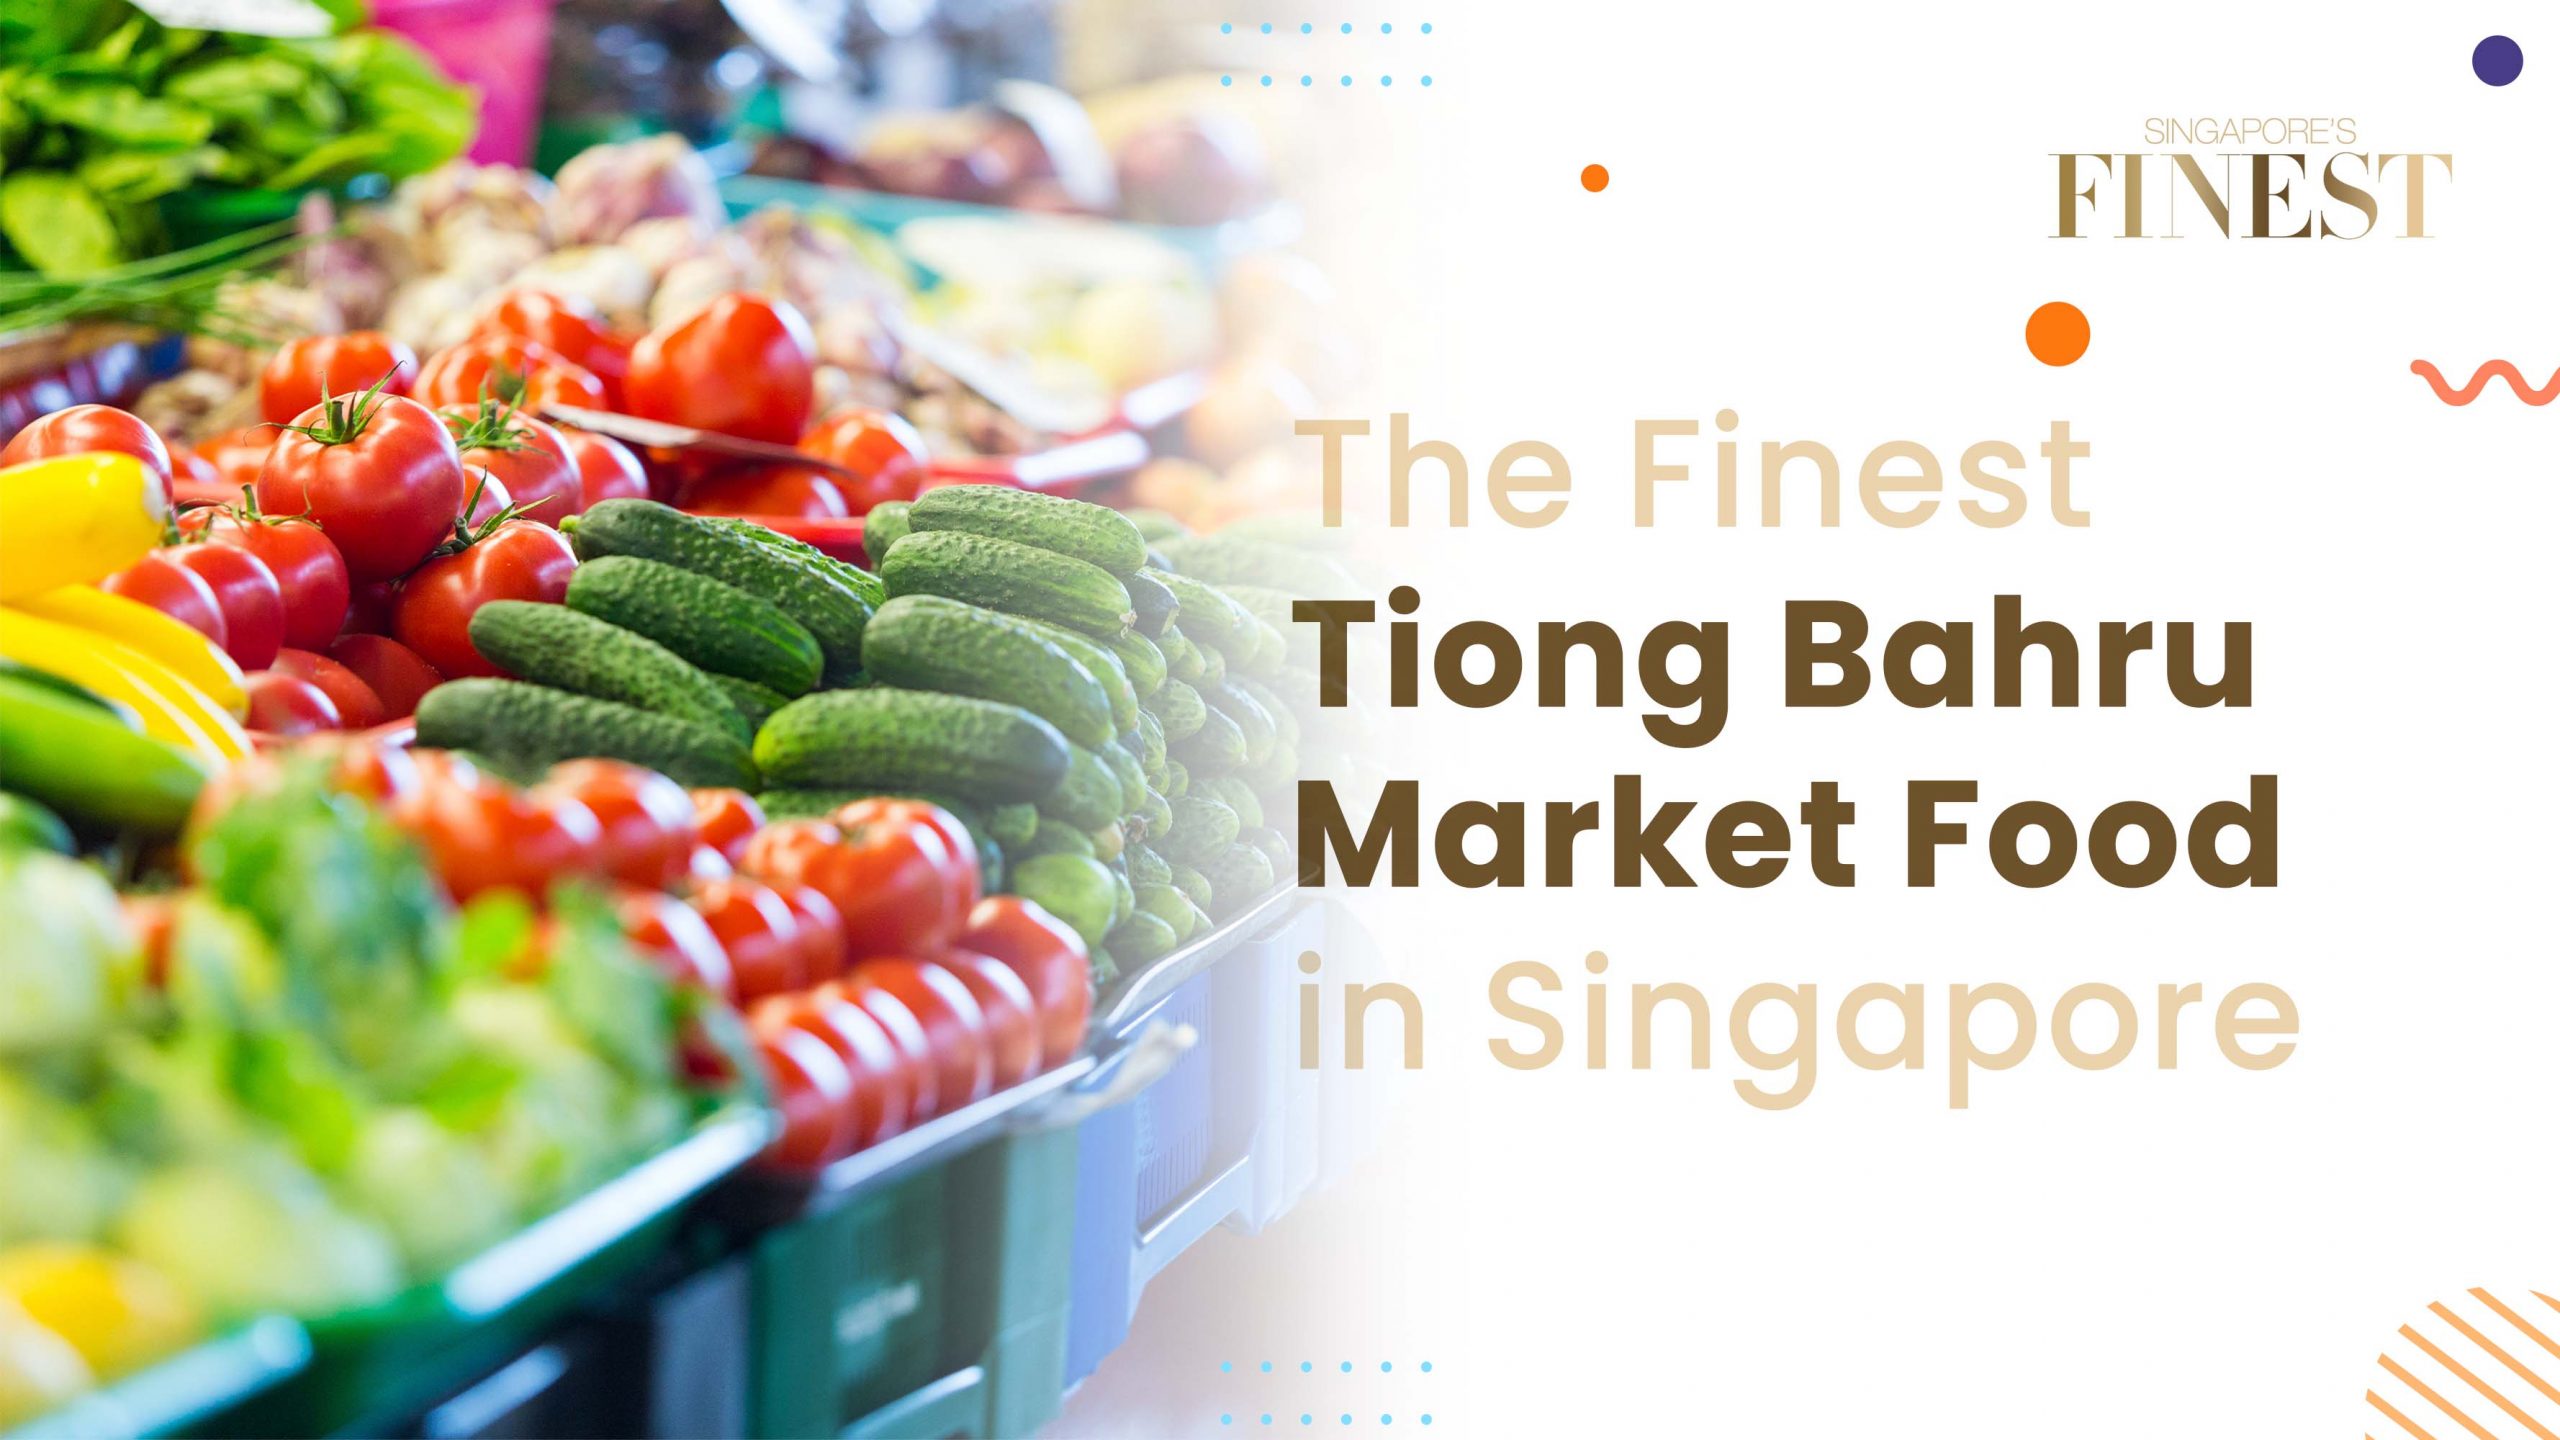 Finest Tiong Bahru Market Food in Singapore